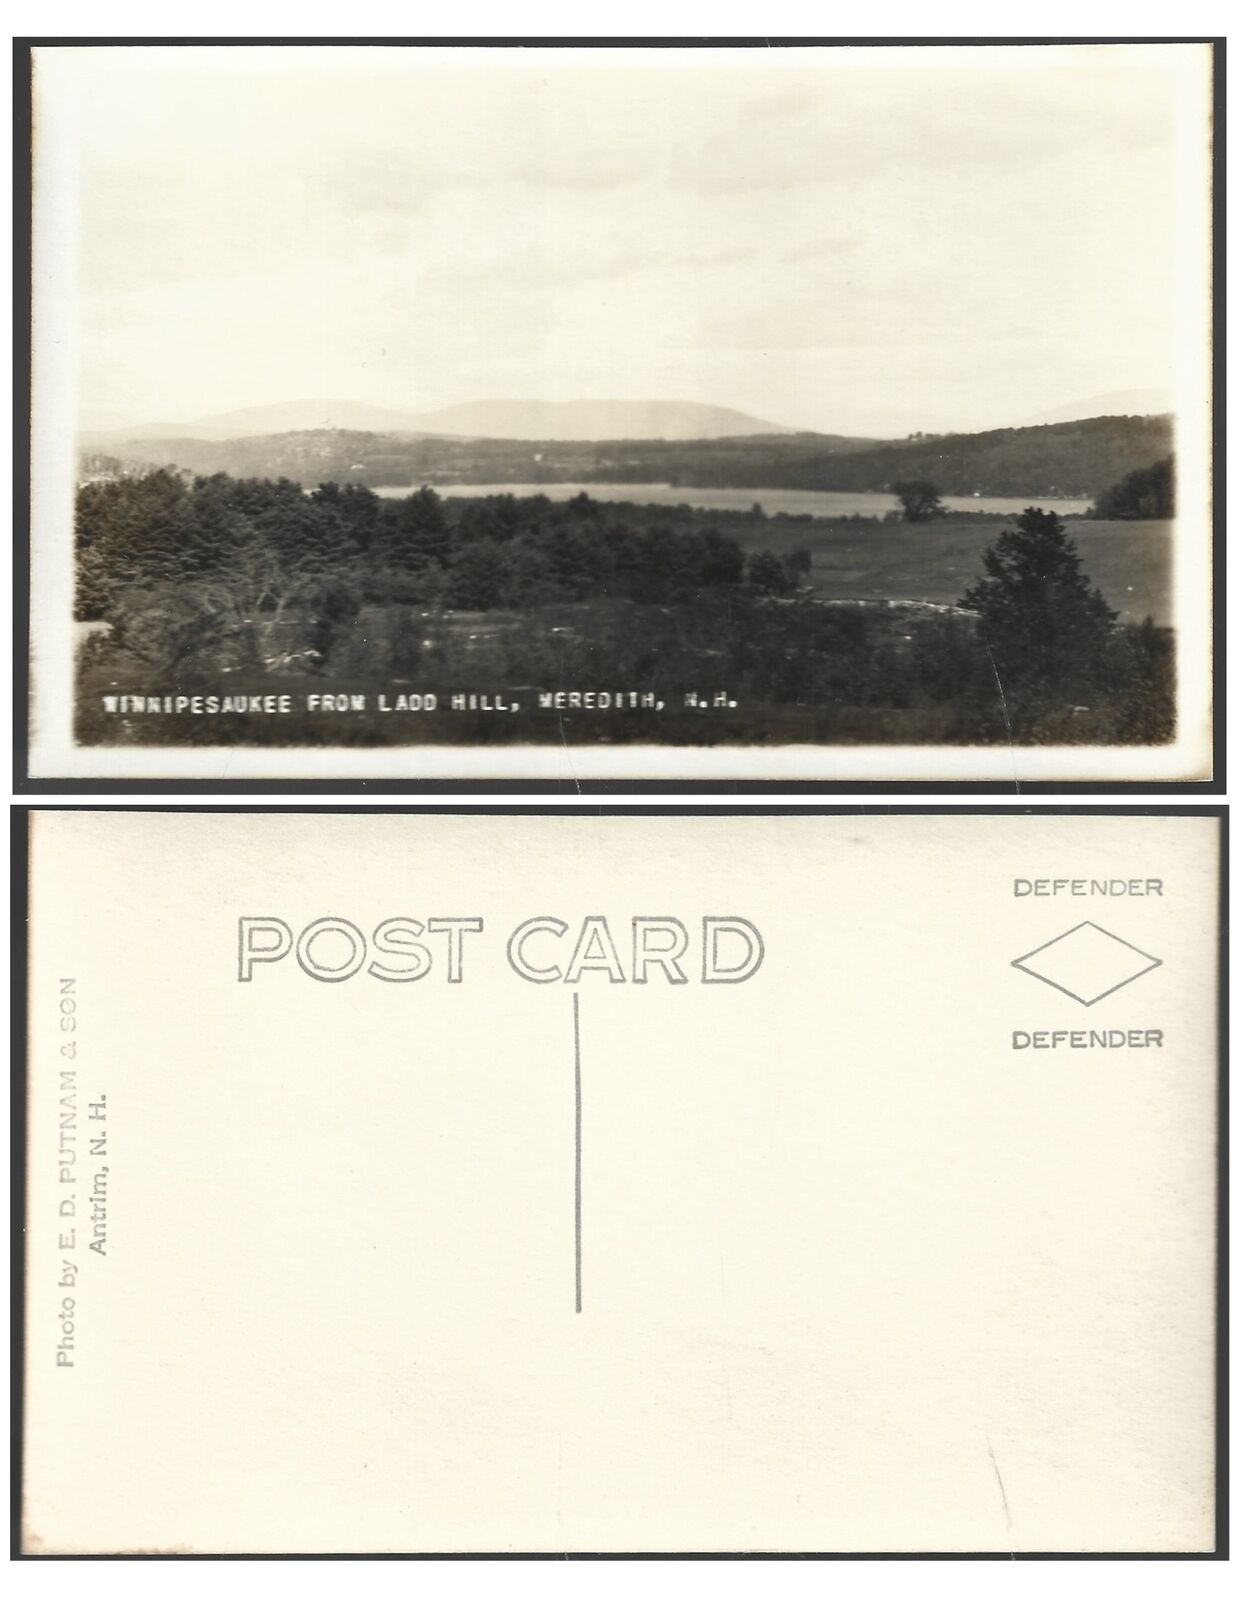 Real Picture Post Card RPPC Meredith NH Winnipesaukee from Ladd Hill Unused 